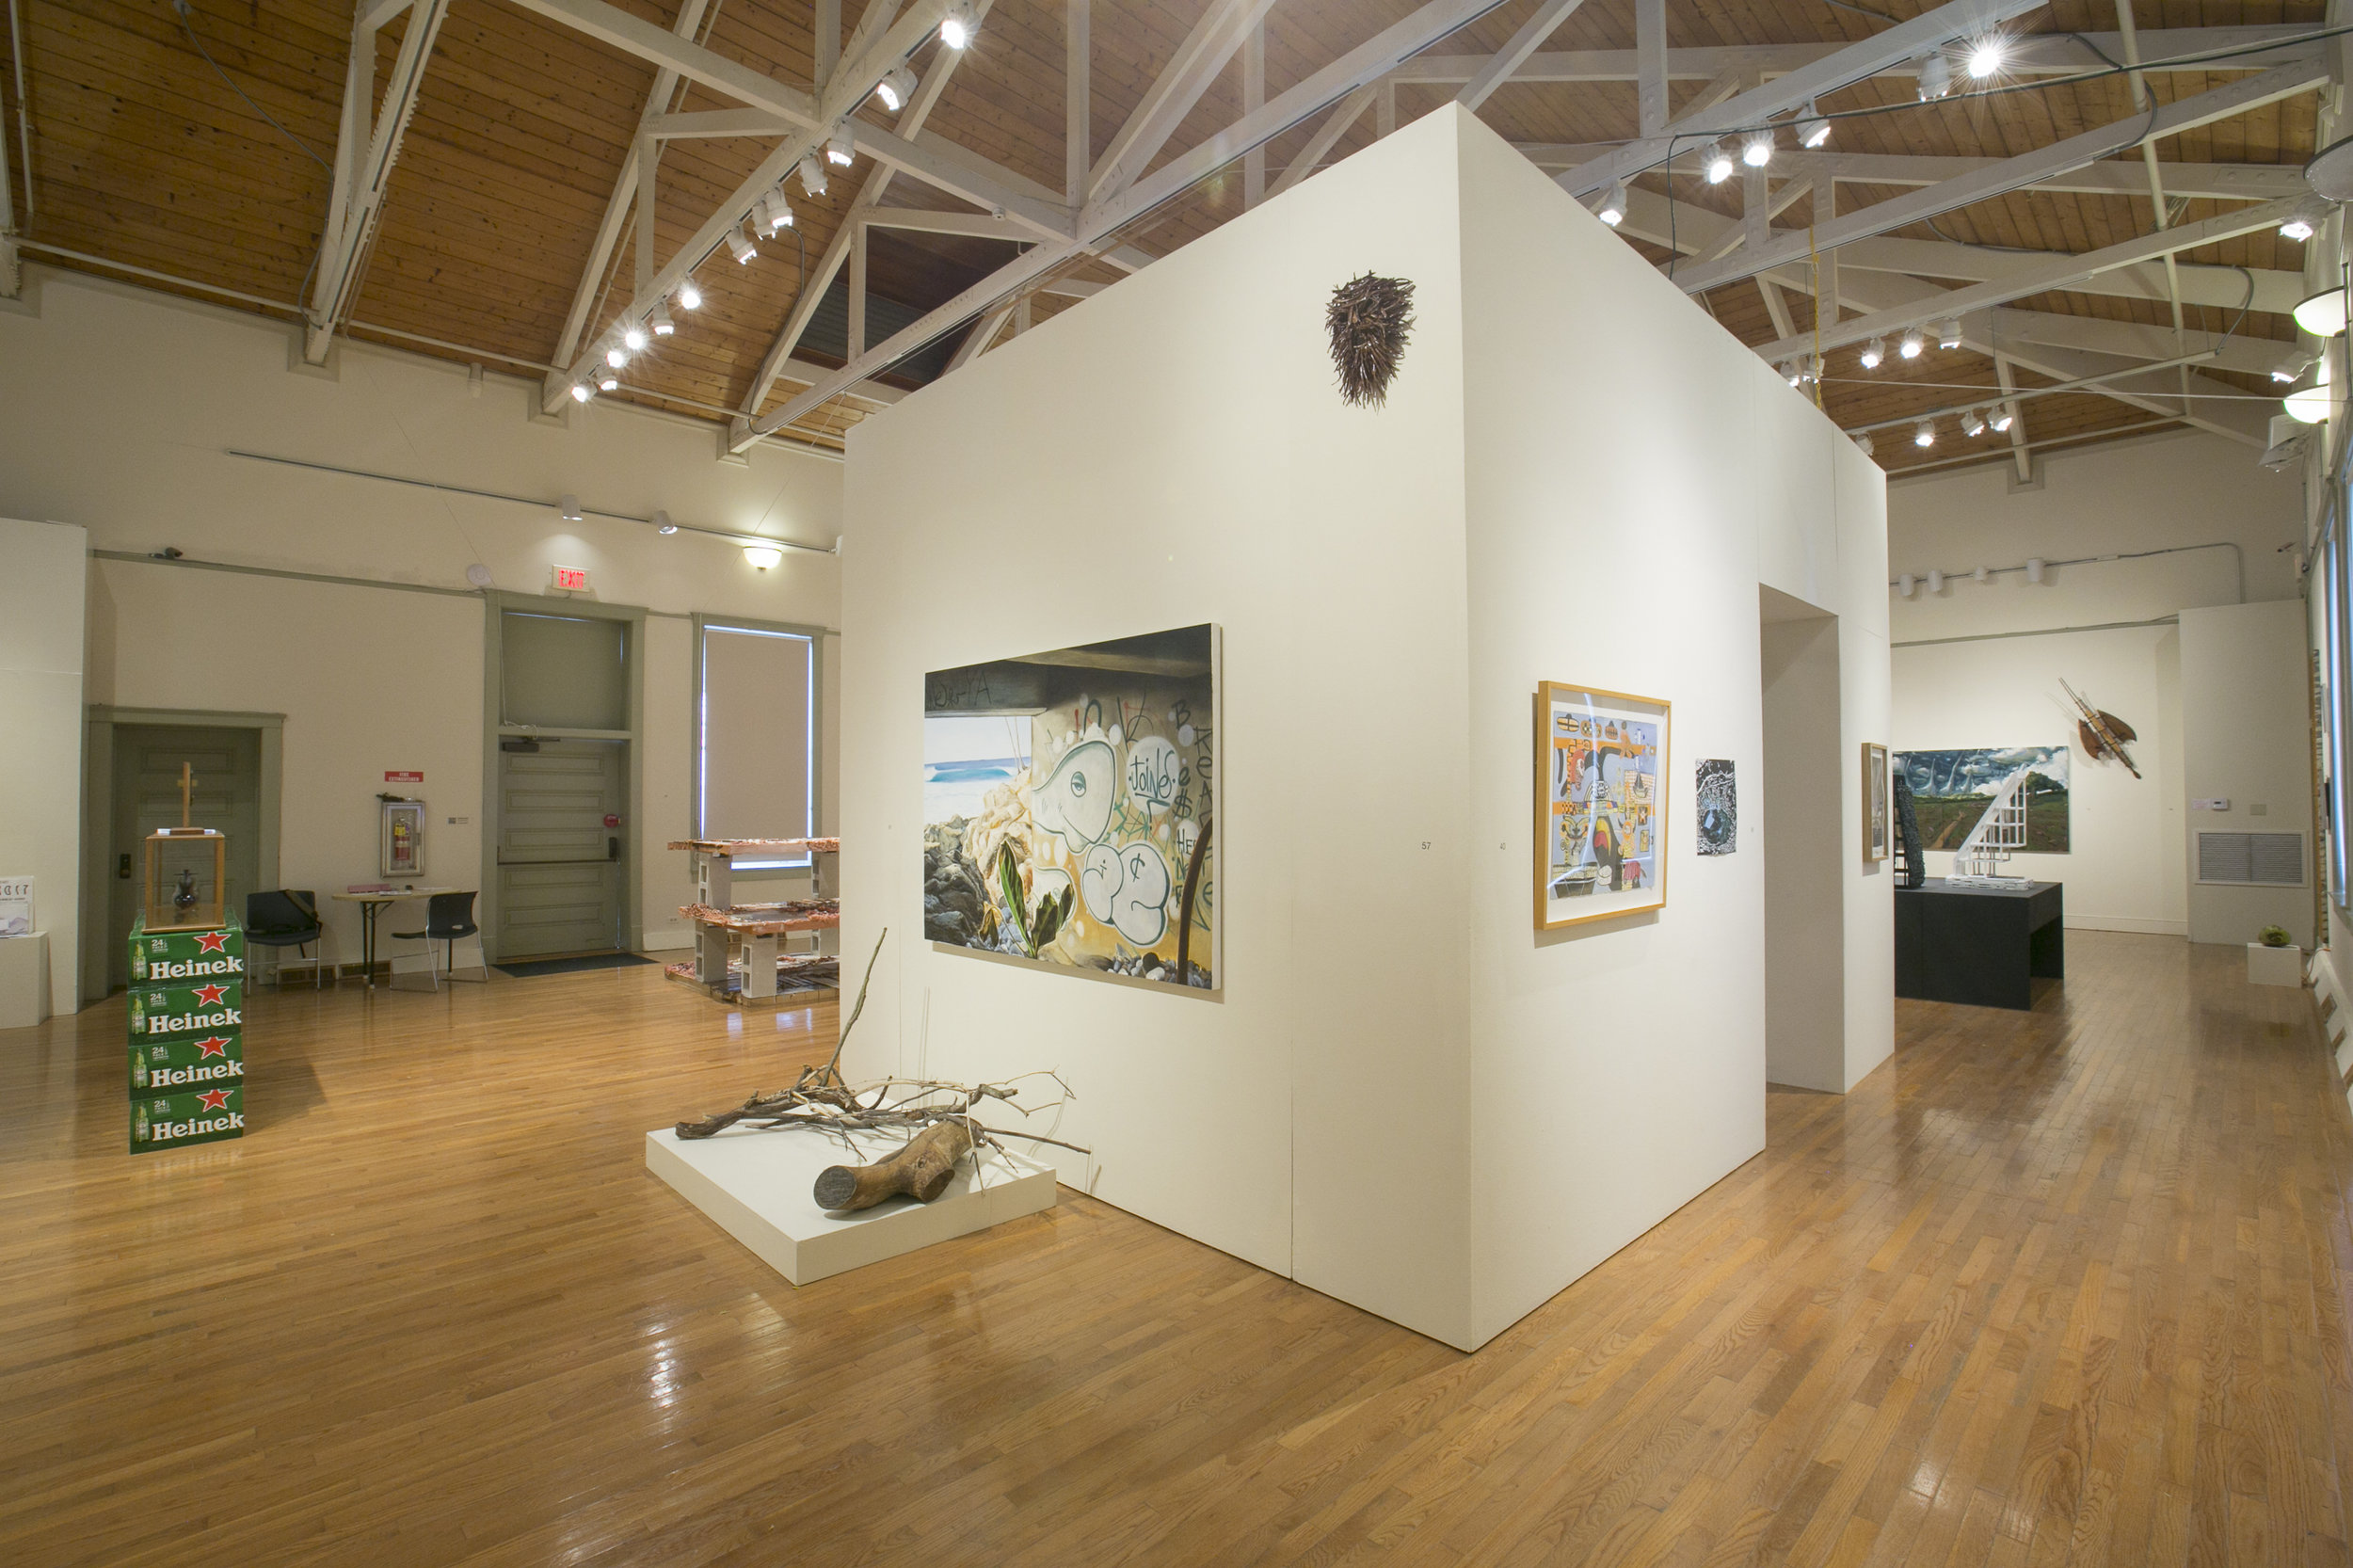  Installation view of CONTACT 3017: Hawai'i in a Thousand Years 